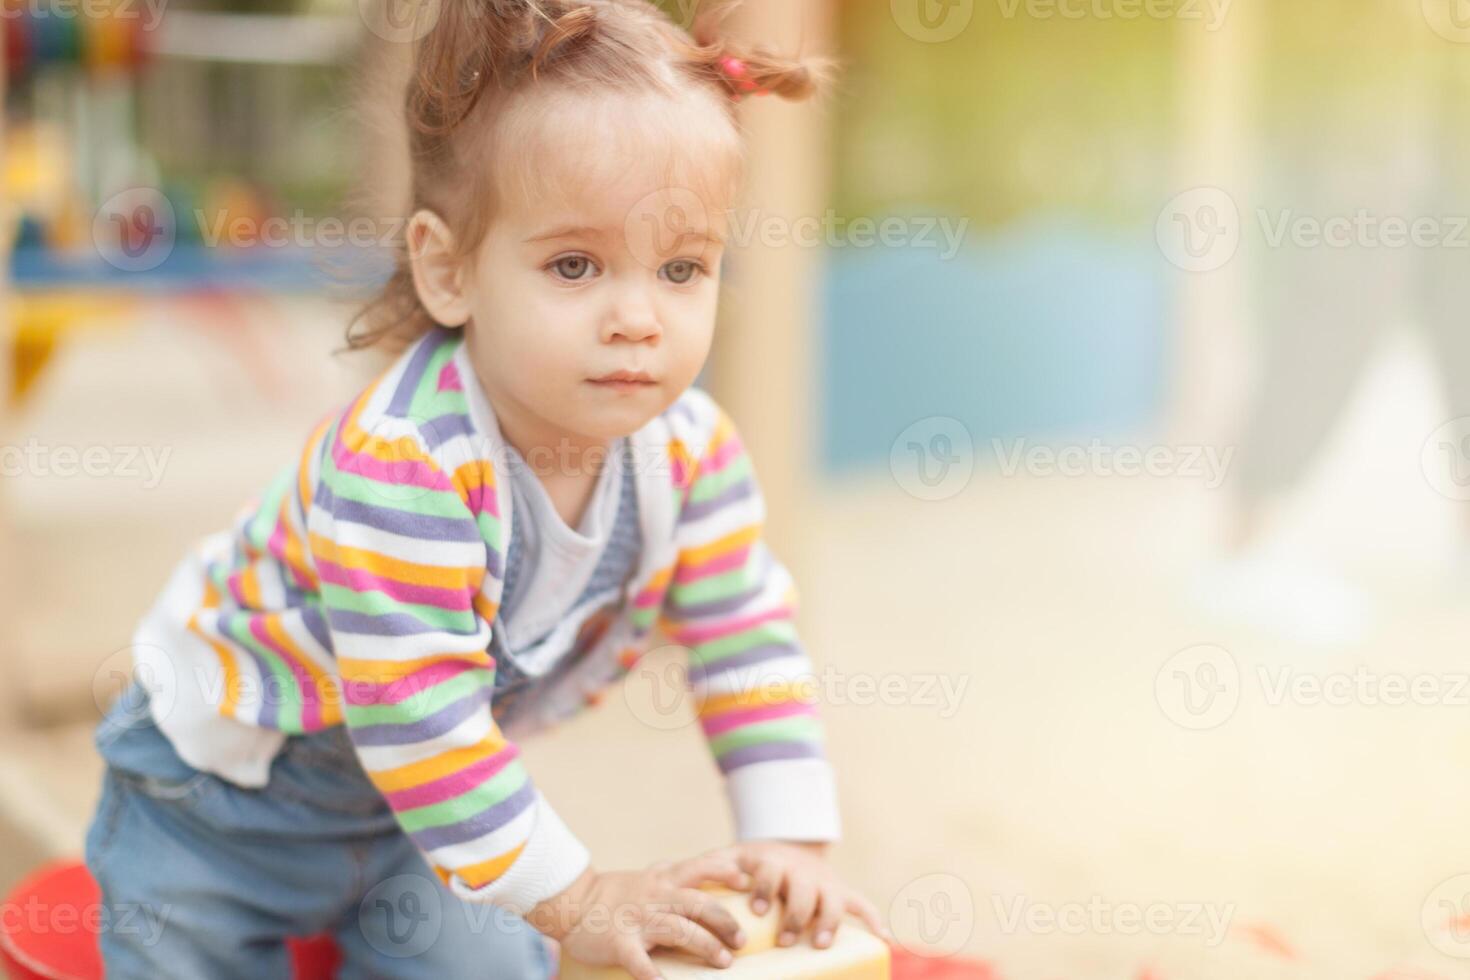 A little girl with two tails in a striped blouse plays a summer sunny day in the playground photo